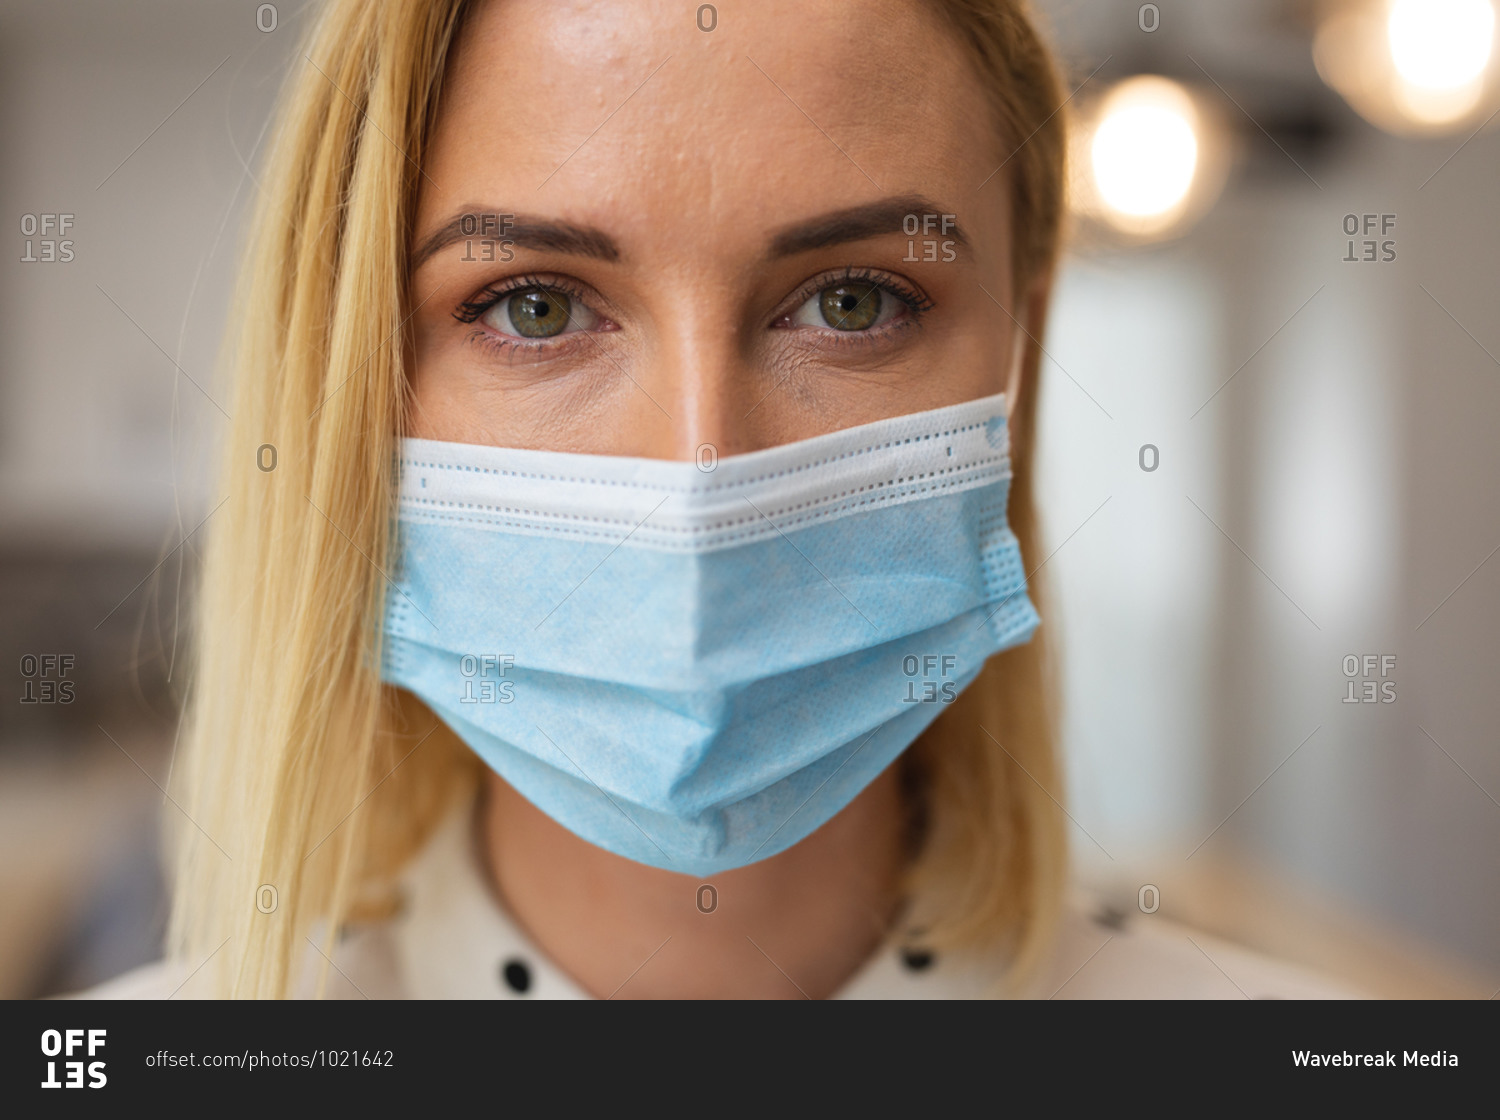 Portrait of Caucasian woman spending time at home, wearing face mask, looking at camera. Social distancing during Covid 19 Coronavirus quarantine lockdown.